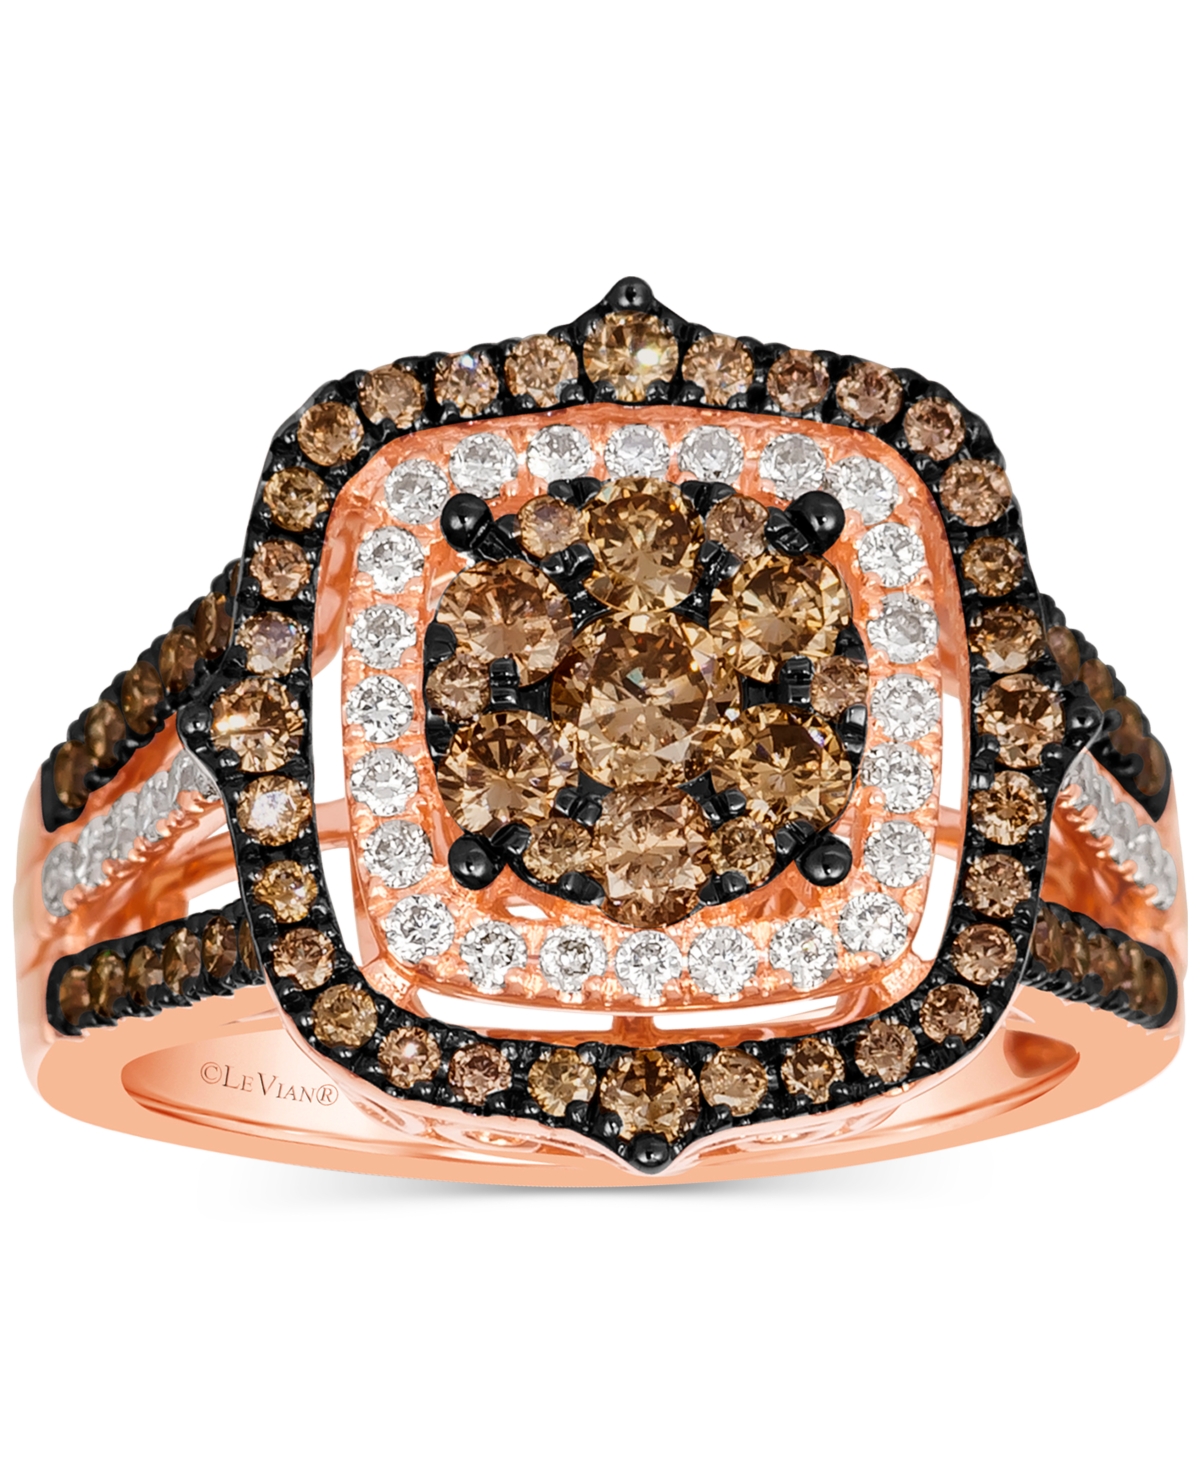 Le Vian Chocolate Diamond & Nude Diamond Halo Cluster Ring (1-1/2 Ct. T.w.) In 14k Rose Gold (also Available In Yellow Gold